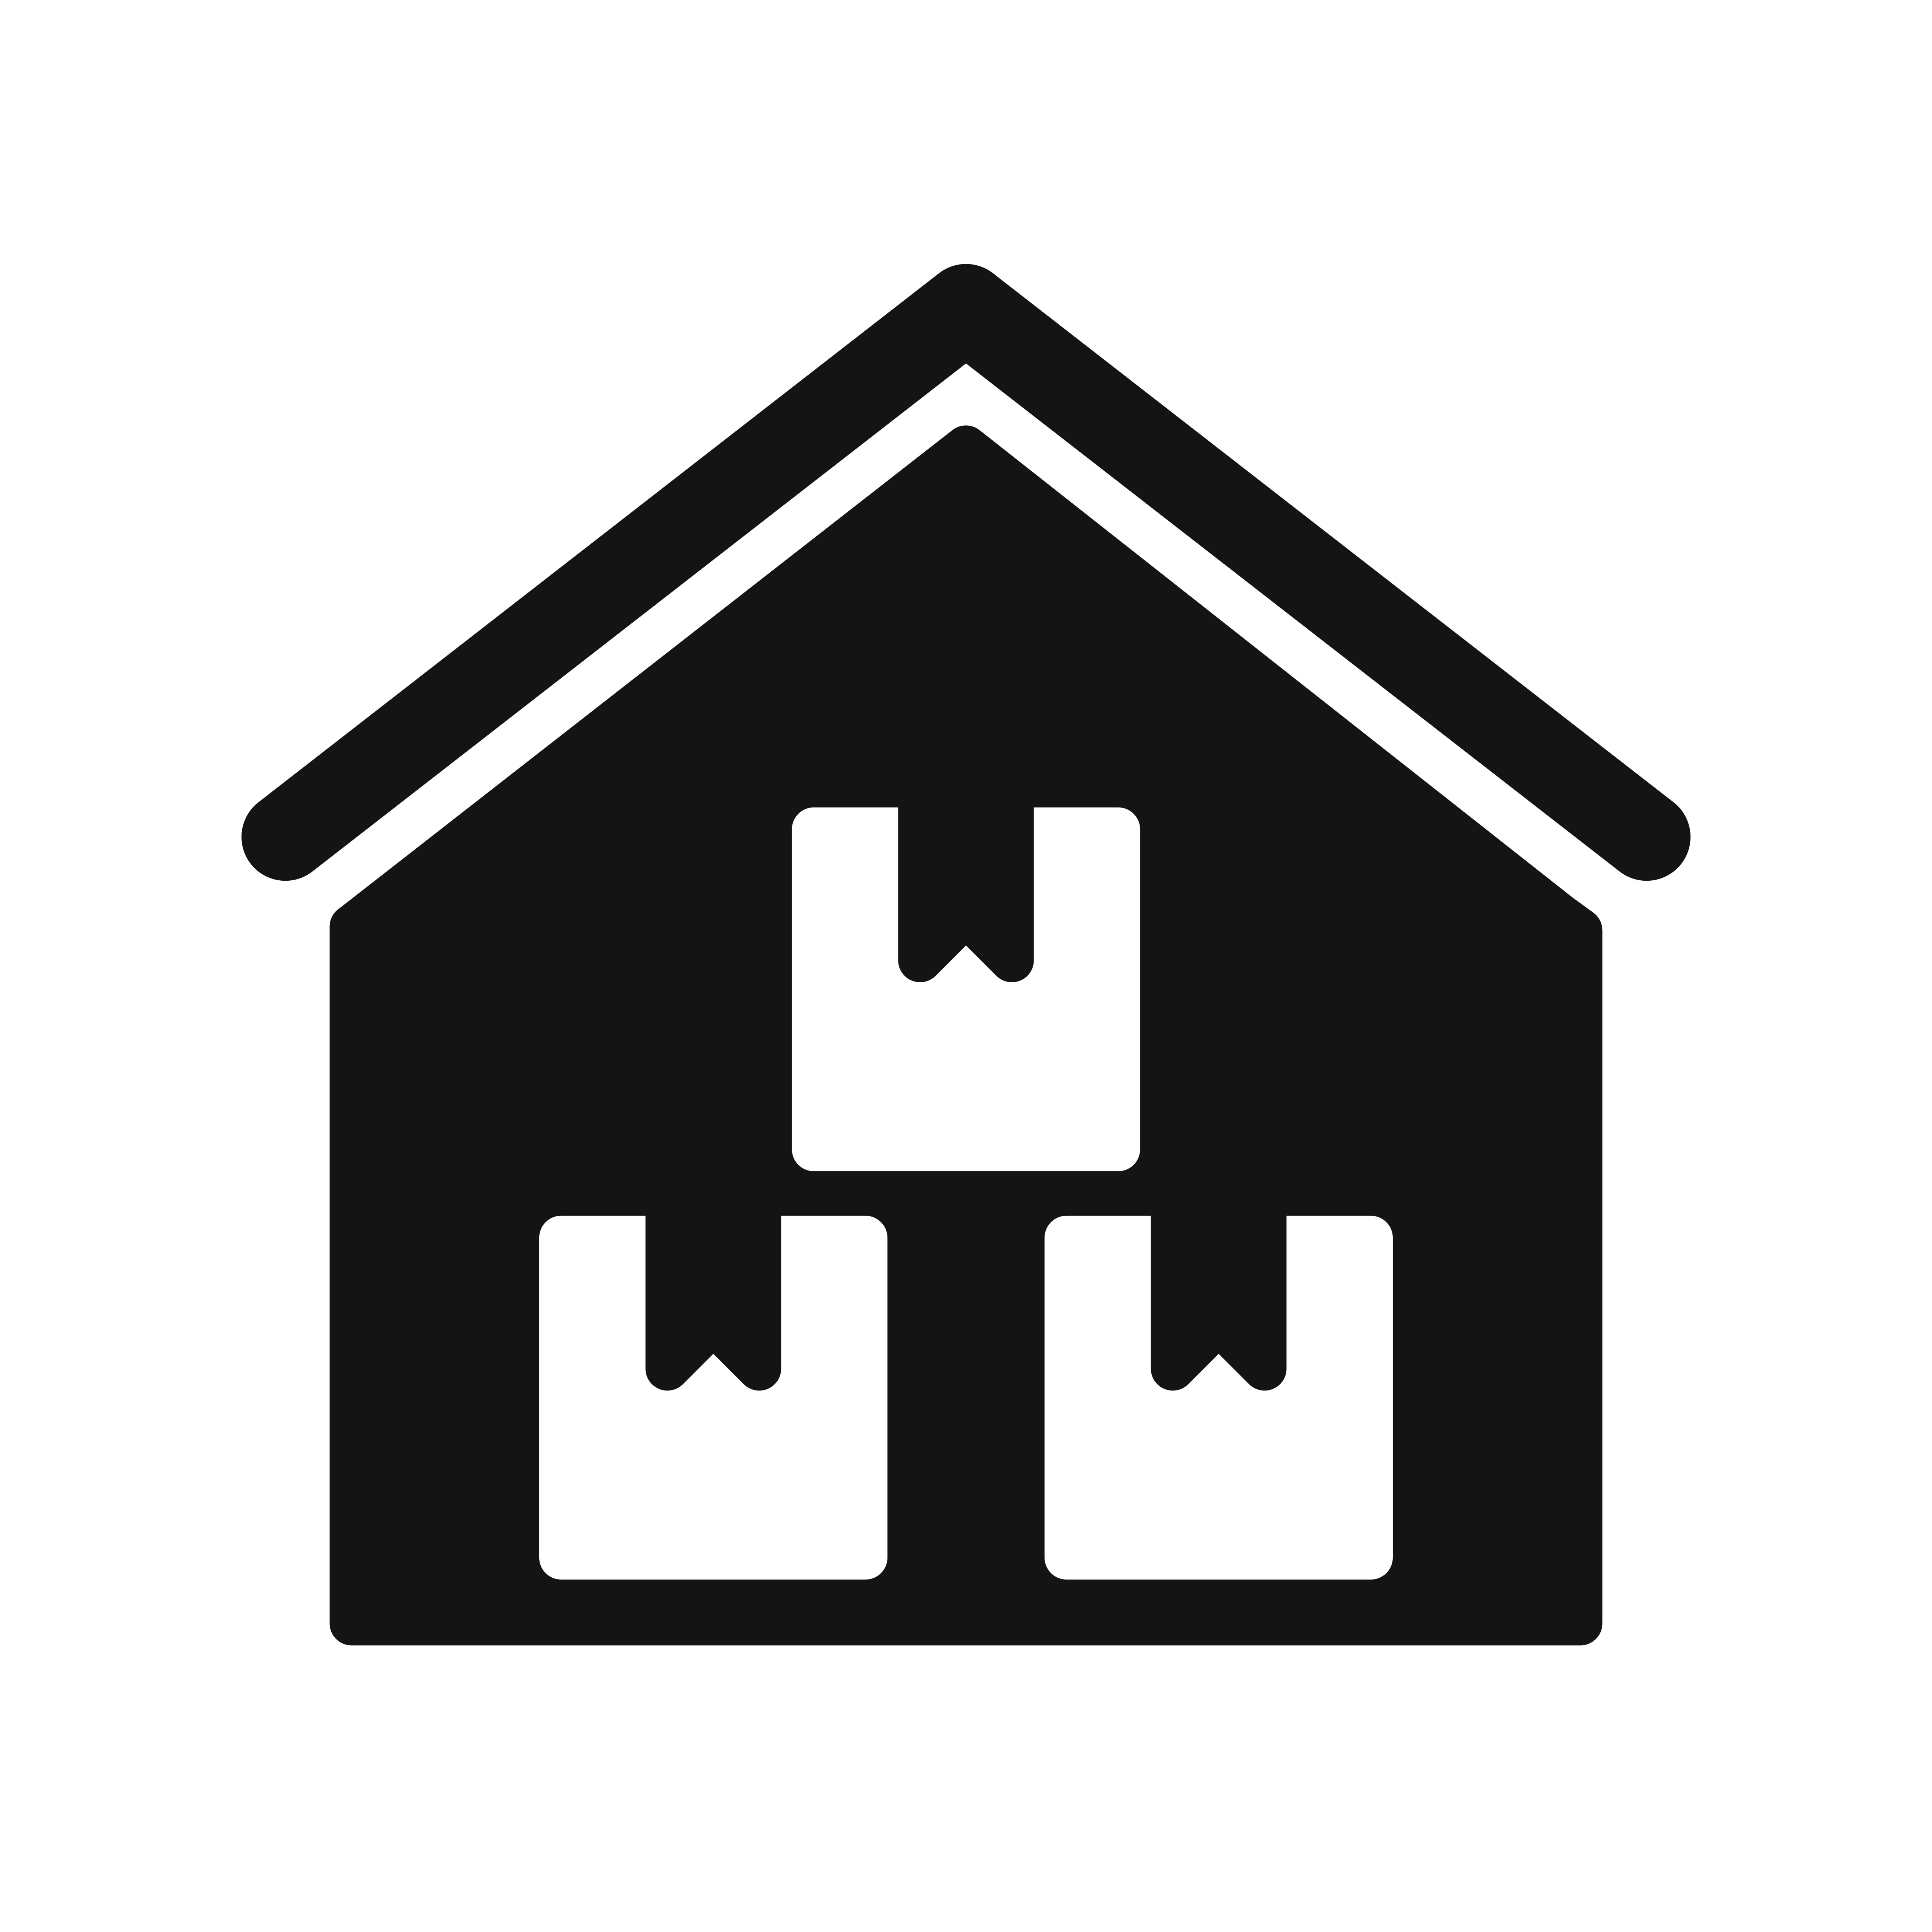 Download Storage Warehouse Vector Icon 357225 - Download Free ...